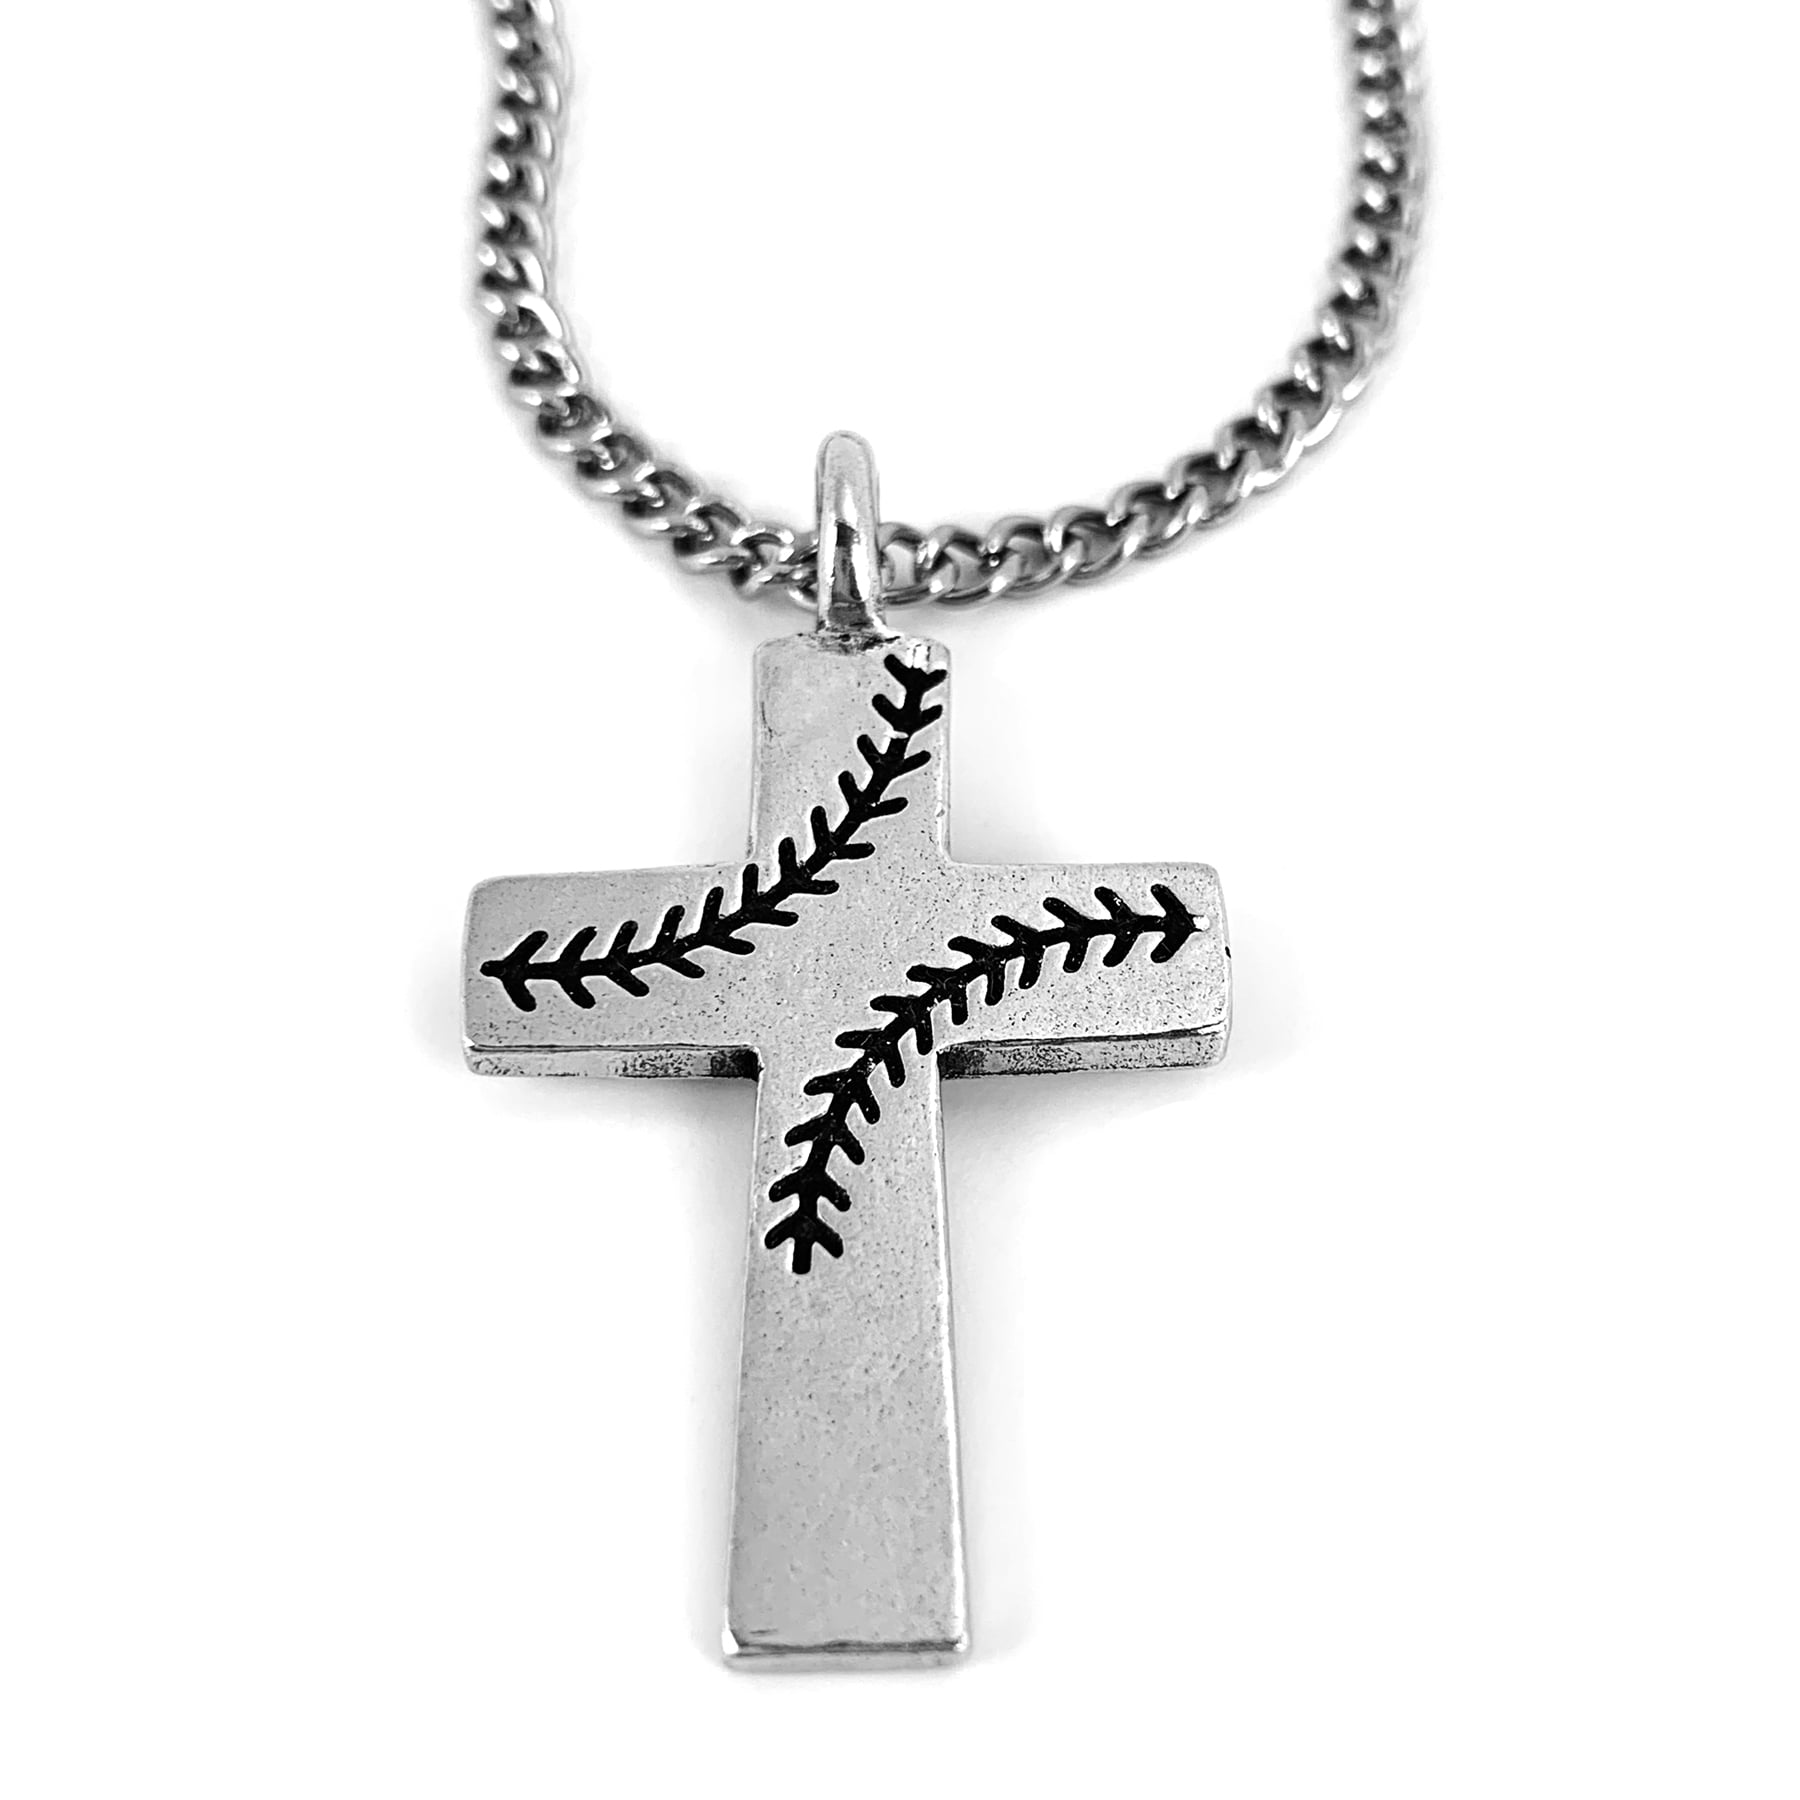 Baseball Stitch wbasecrosschain Cross Necklace on Stainless Steel Curb Chain made in the USA 6ad4c475 ded2 47ba b0b2 91a7d0ea593e.a2c1e698d2fb509c96c089a932aab789